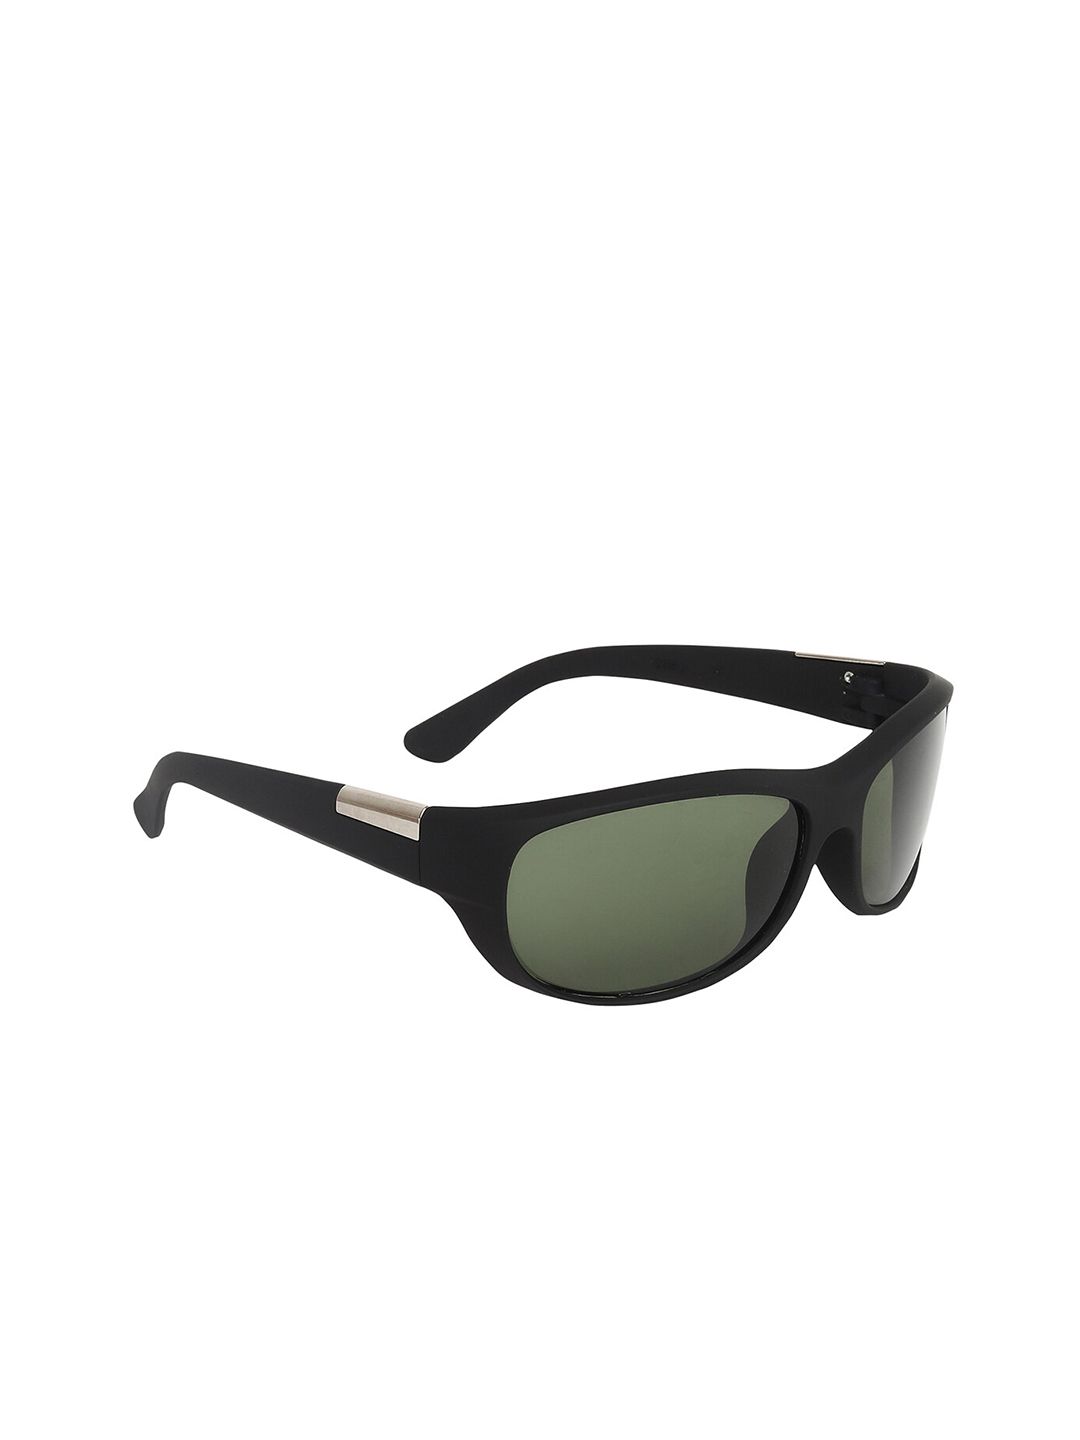 CRIBA Unisex Black Lens & Black Sports Sunglasses with UV Protected Lens Price in India